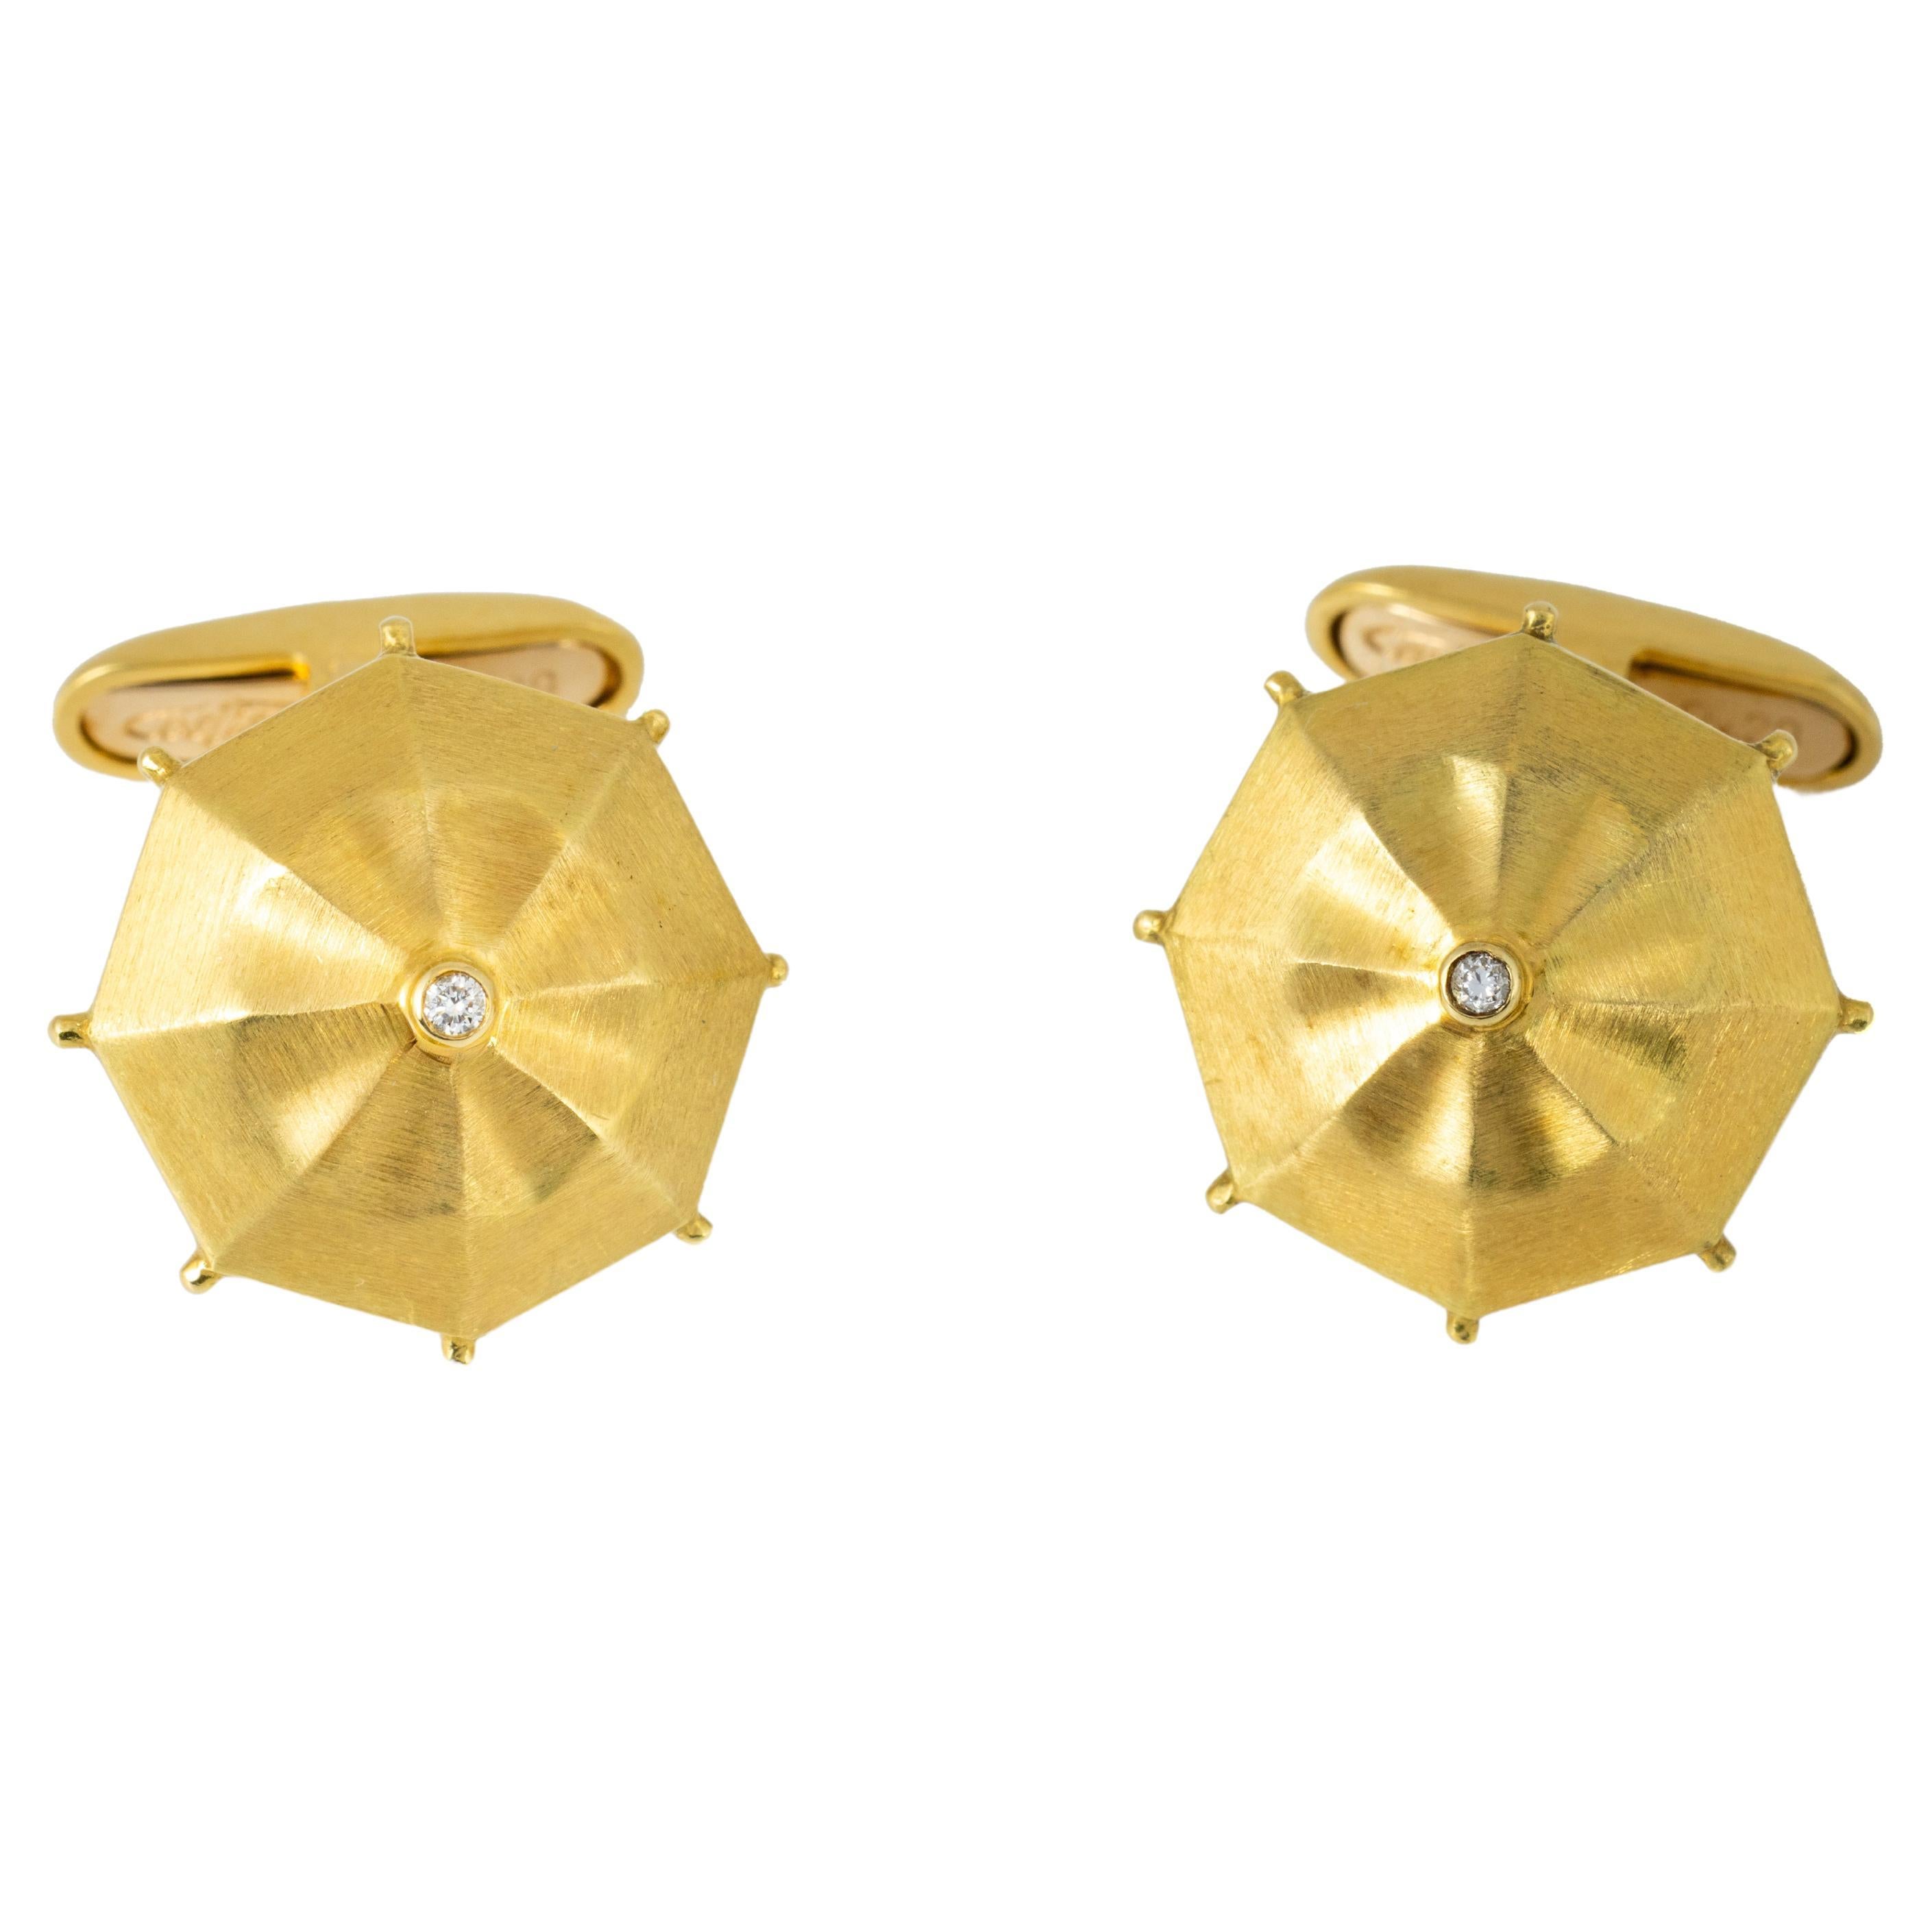 "Costis" Umbrella Collection Cufflinks YG with 0.04 carats Diamond on the center For Sale